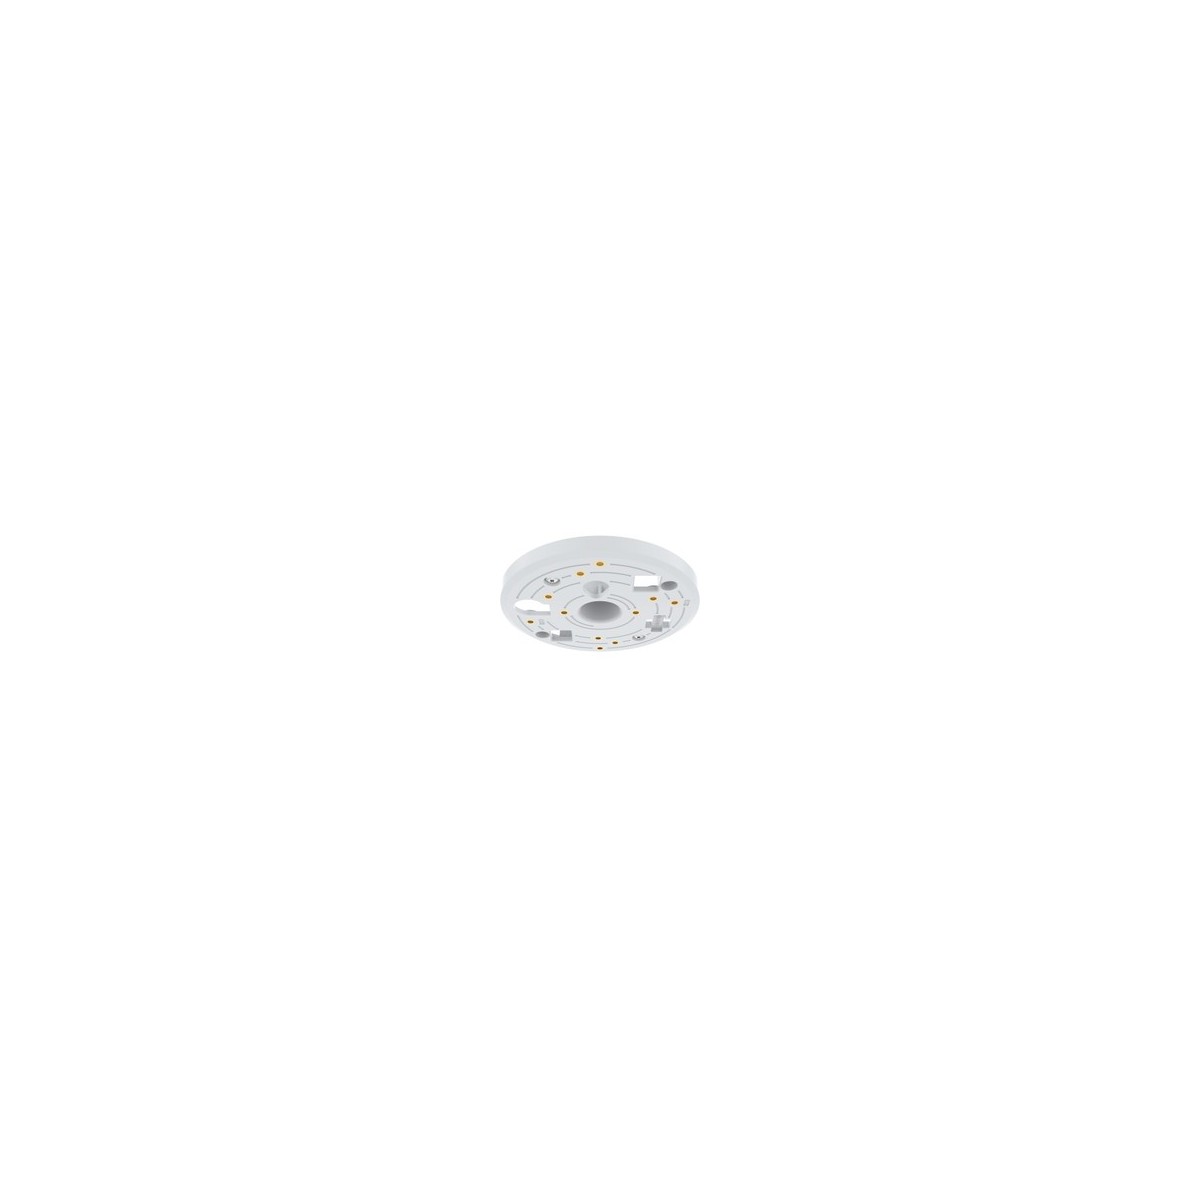 Axis 01467-001 - Mount - Indoor - White - Axis - Plastic - WEEE - CE - REACH